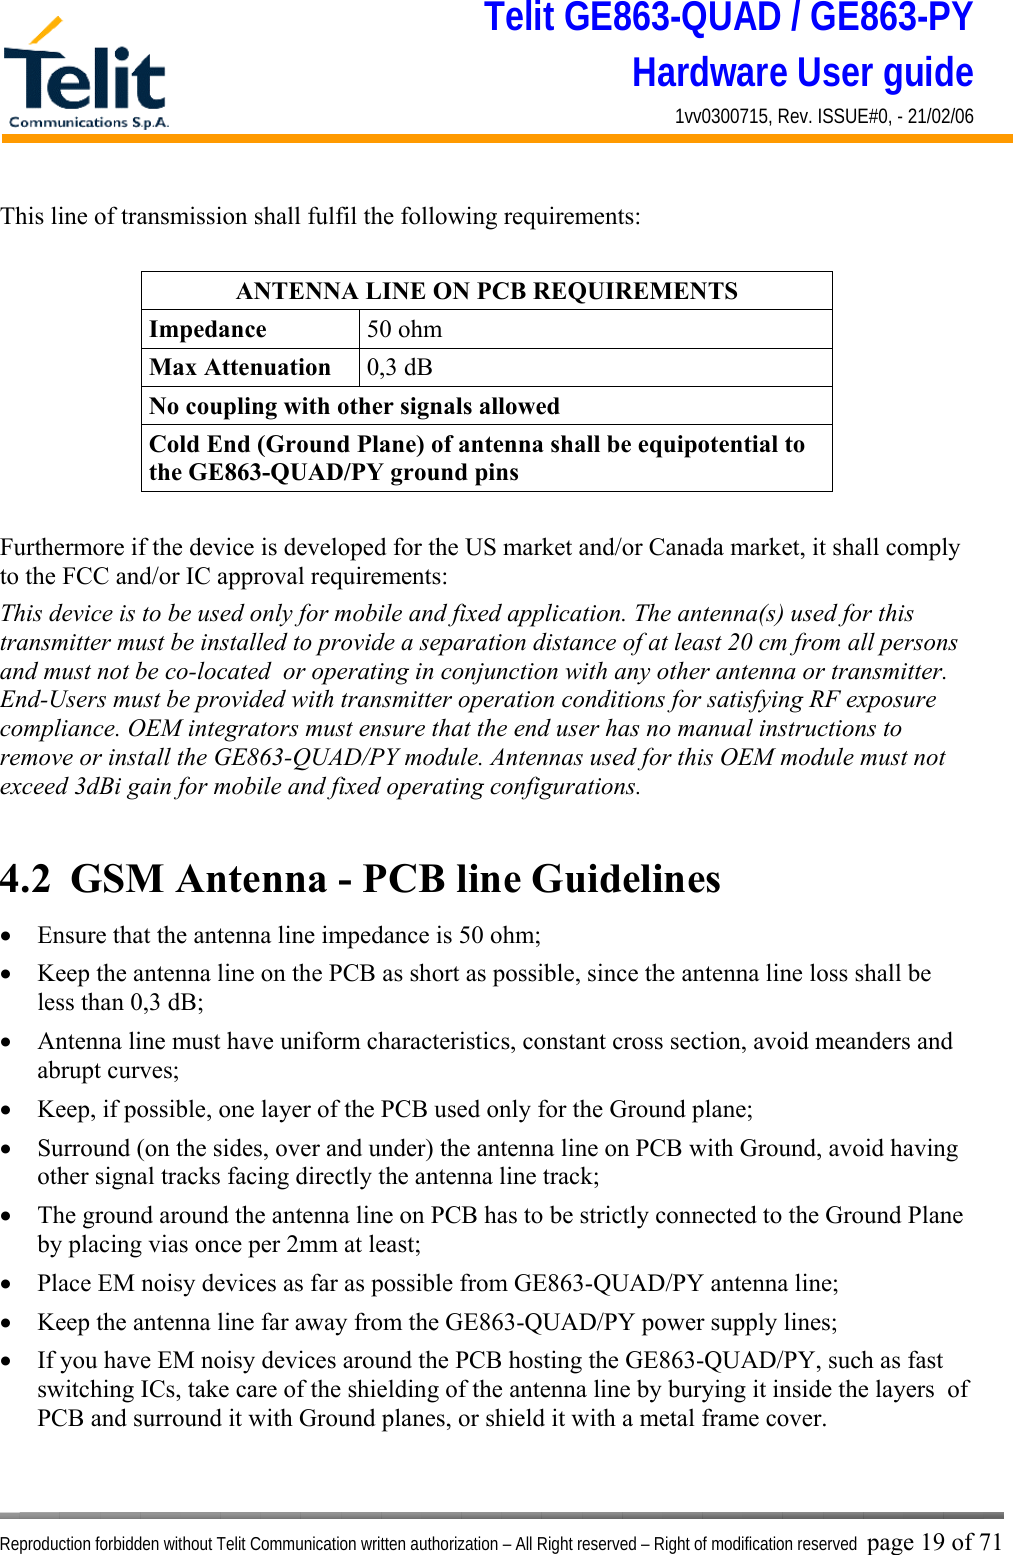 Telit GE863-QUAD / GE863-PY Hardware User guide 1vv0300715, Rev. ISSUE#0, - 21/02/06    Reproduction forbidden without Telit Communication written authorization – All Right reserved – Right of modification reserved page 19 of 71 This line of transmission shall fulfil the following requirements:  ANTENNA LINE ON PCB REQUIREMENTS Impedance  50 ohm Max Attenuation  0,3 dB No coupling with other signals allowed Cold End (Ground Plane) of antenna shall be equipotential to the GE863-QUAD/PY ground pins  Furthermore if the device is developed for the US market and/or Canada market, it shall comply to the FCC and/or IC approval requirements: This device is to be used only for mobile and fixed application. The antenna(s) used for this transmitter must be installed to provide a separation distance of at least 20 cm from all persons and must not be co-located  or operating in conjunction with any other antenna or transmitter. End-Users must be provided with transmitter operation conditions for satisfying RF exposure compliance. OEM integrators must ensure that the end user has no manual instructions to remove or install the GE863-QUAD/PY module. Antennas used for this OEM module must not exceed 3dBi gain for mobile and fixed operating configurations.  4.2  GSM Antenna - PCB line Guidelines •  Ensure that the antenna line impedance is 50 ohm; •  Keep the antenna line on the PCB as short as possible, since the antenna line loss shall be less than 0,3 dB; •  Antenna line must have uniform characteristics, constant cross section, avoid meanders and abrupt curves; •  Keep, if possible, one layer of the PCB used only for the Ground plane; •  Surround (on the sides, over and under) the antenna line on PCB with Ground, avoid having other signal tracks facing directly the antenna line track; •  The ground around the antenna line on PCB has to be strictly connected to the Ground Plane by placing vias once per 2mm at least; •  Place EM noisy devices as far as possible from GE863-QUAD/PY antenna line; •  Keep the antenna line far away from the GE863-QUAD/PY power supply lines; •  If you have EM noisy devices around the PCB hosting the GE863-QUAD/PY, such as fast switching ICs, take care of the shielding of the antenna line by burying it inside the layers  of PCB and surround it with Ground planes, or shield it with a metal frame cover. 